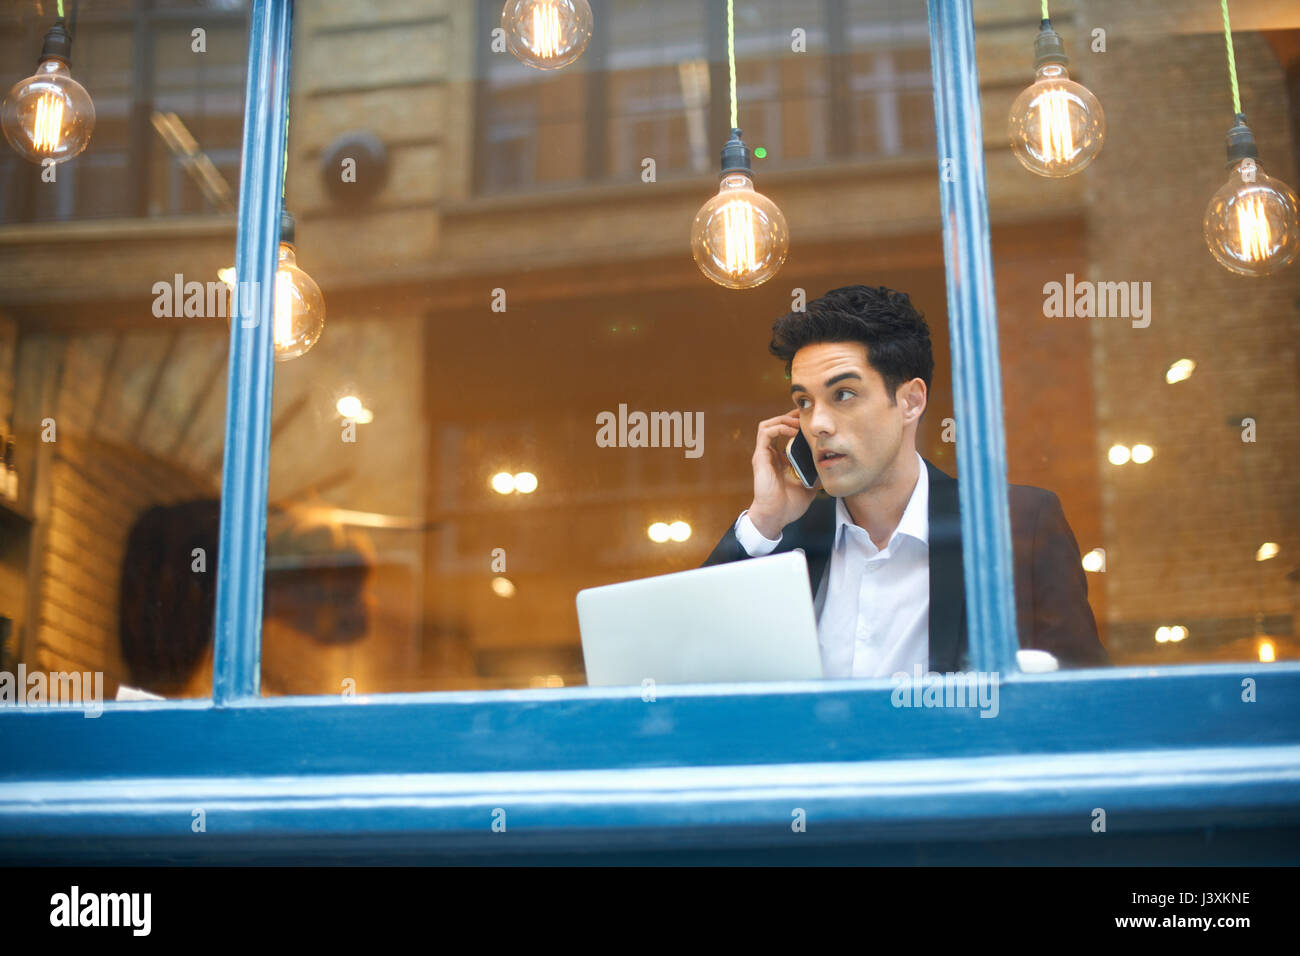 Window view of businessman making smartphone call in cafe Stock Photo